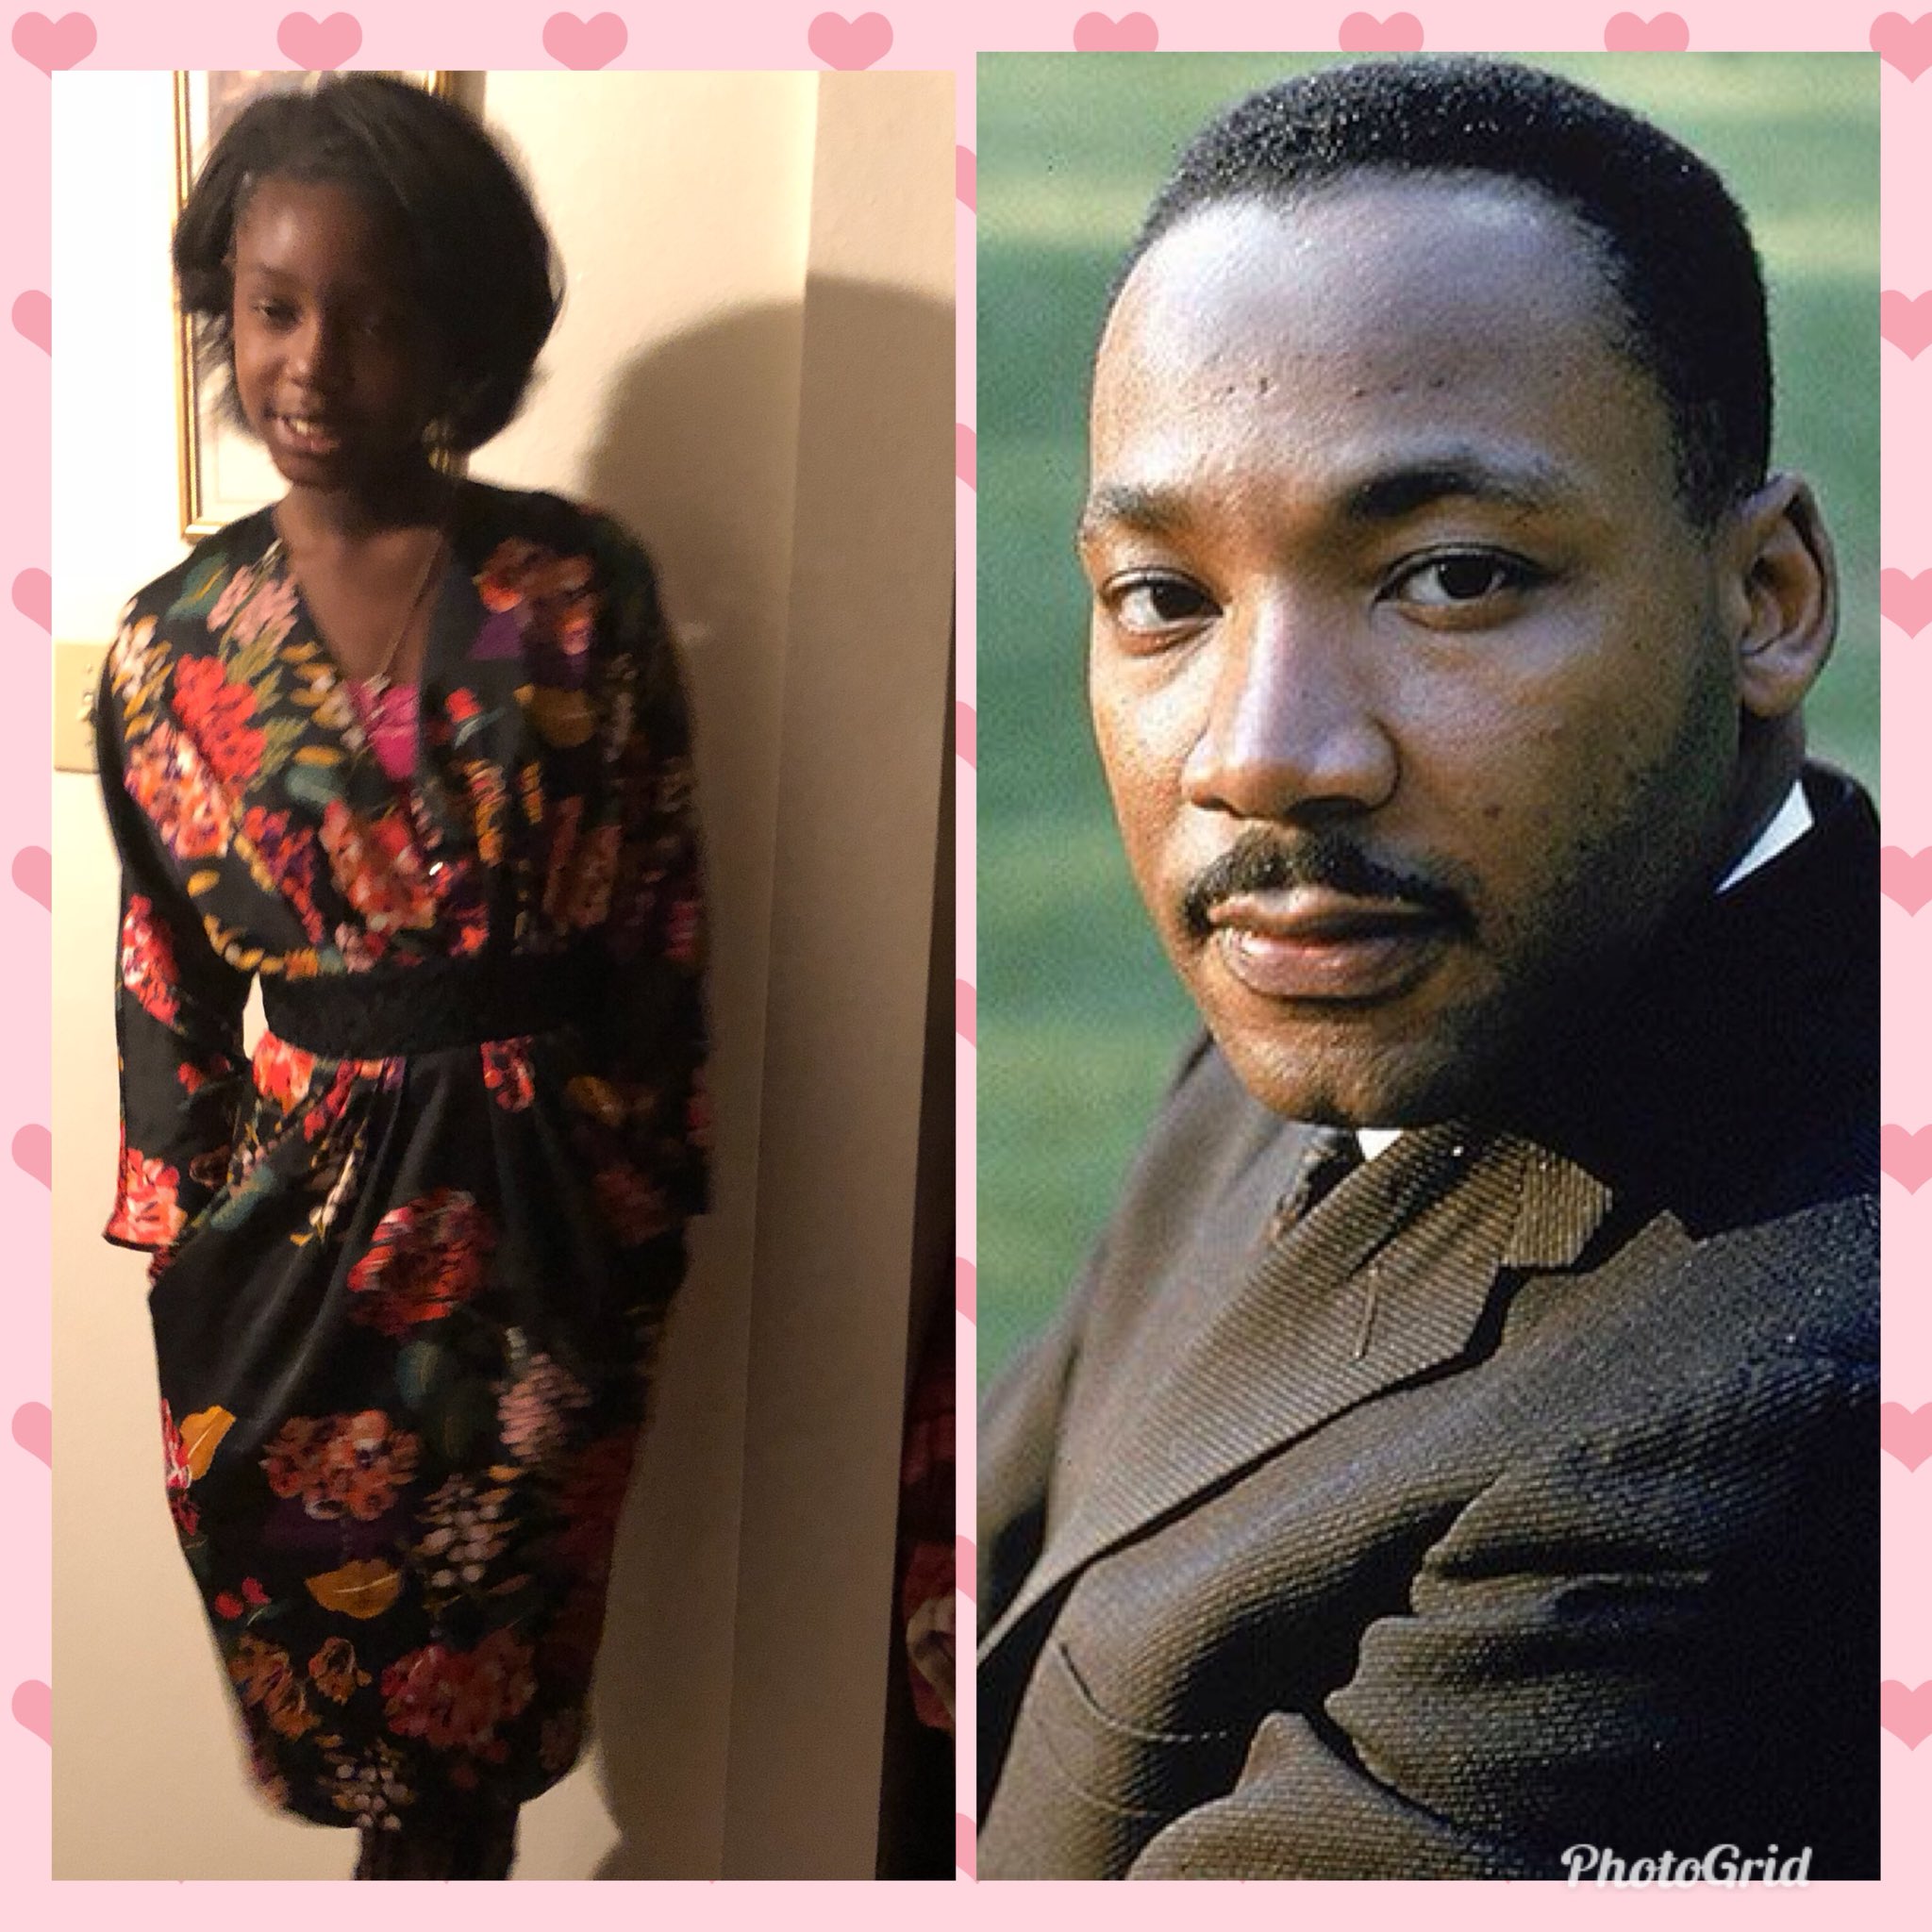 Happy birthday to my one and only baby girl Ariel Essie Mitchell and the Rev. Dr. Martin Luther King Jr.          